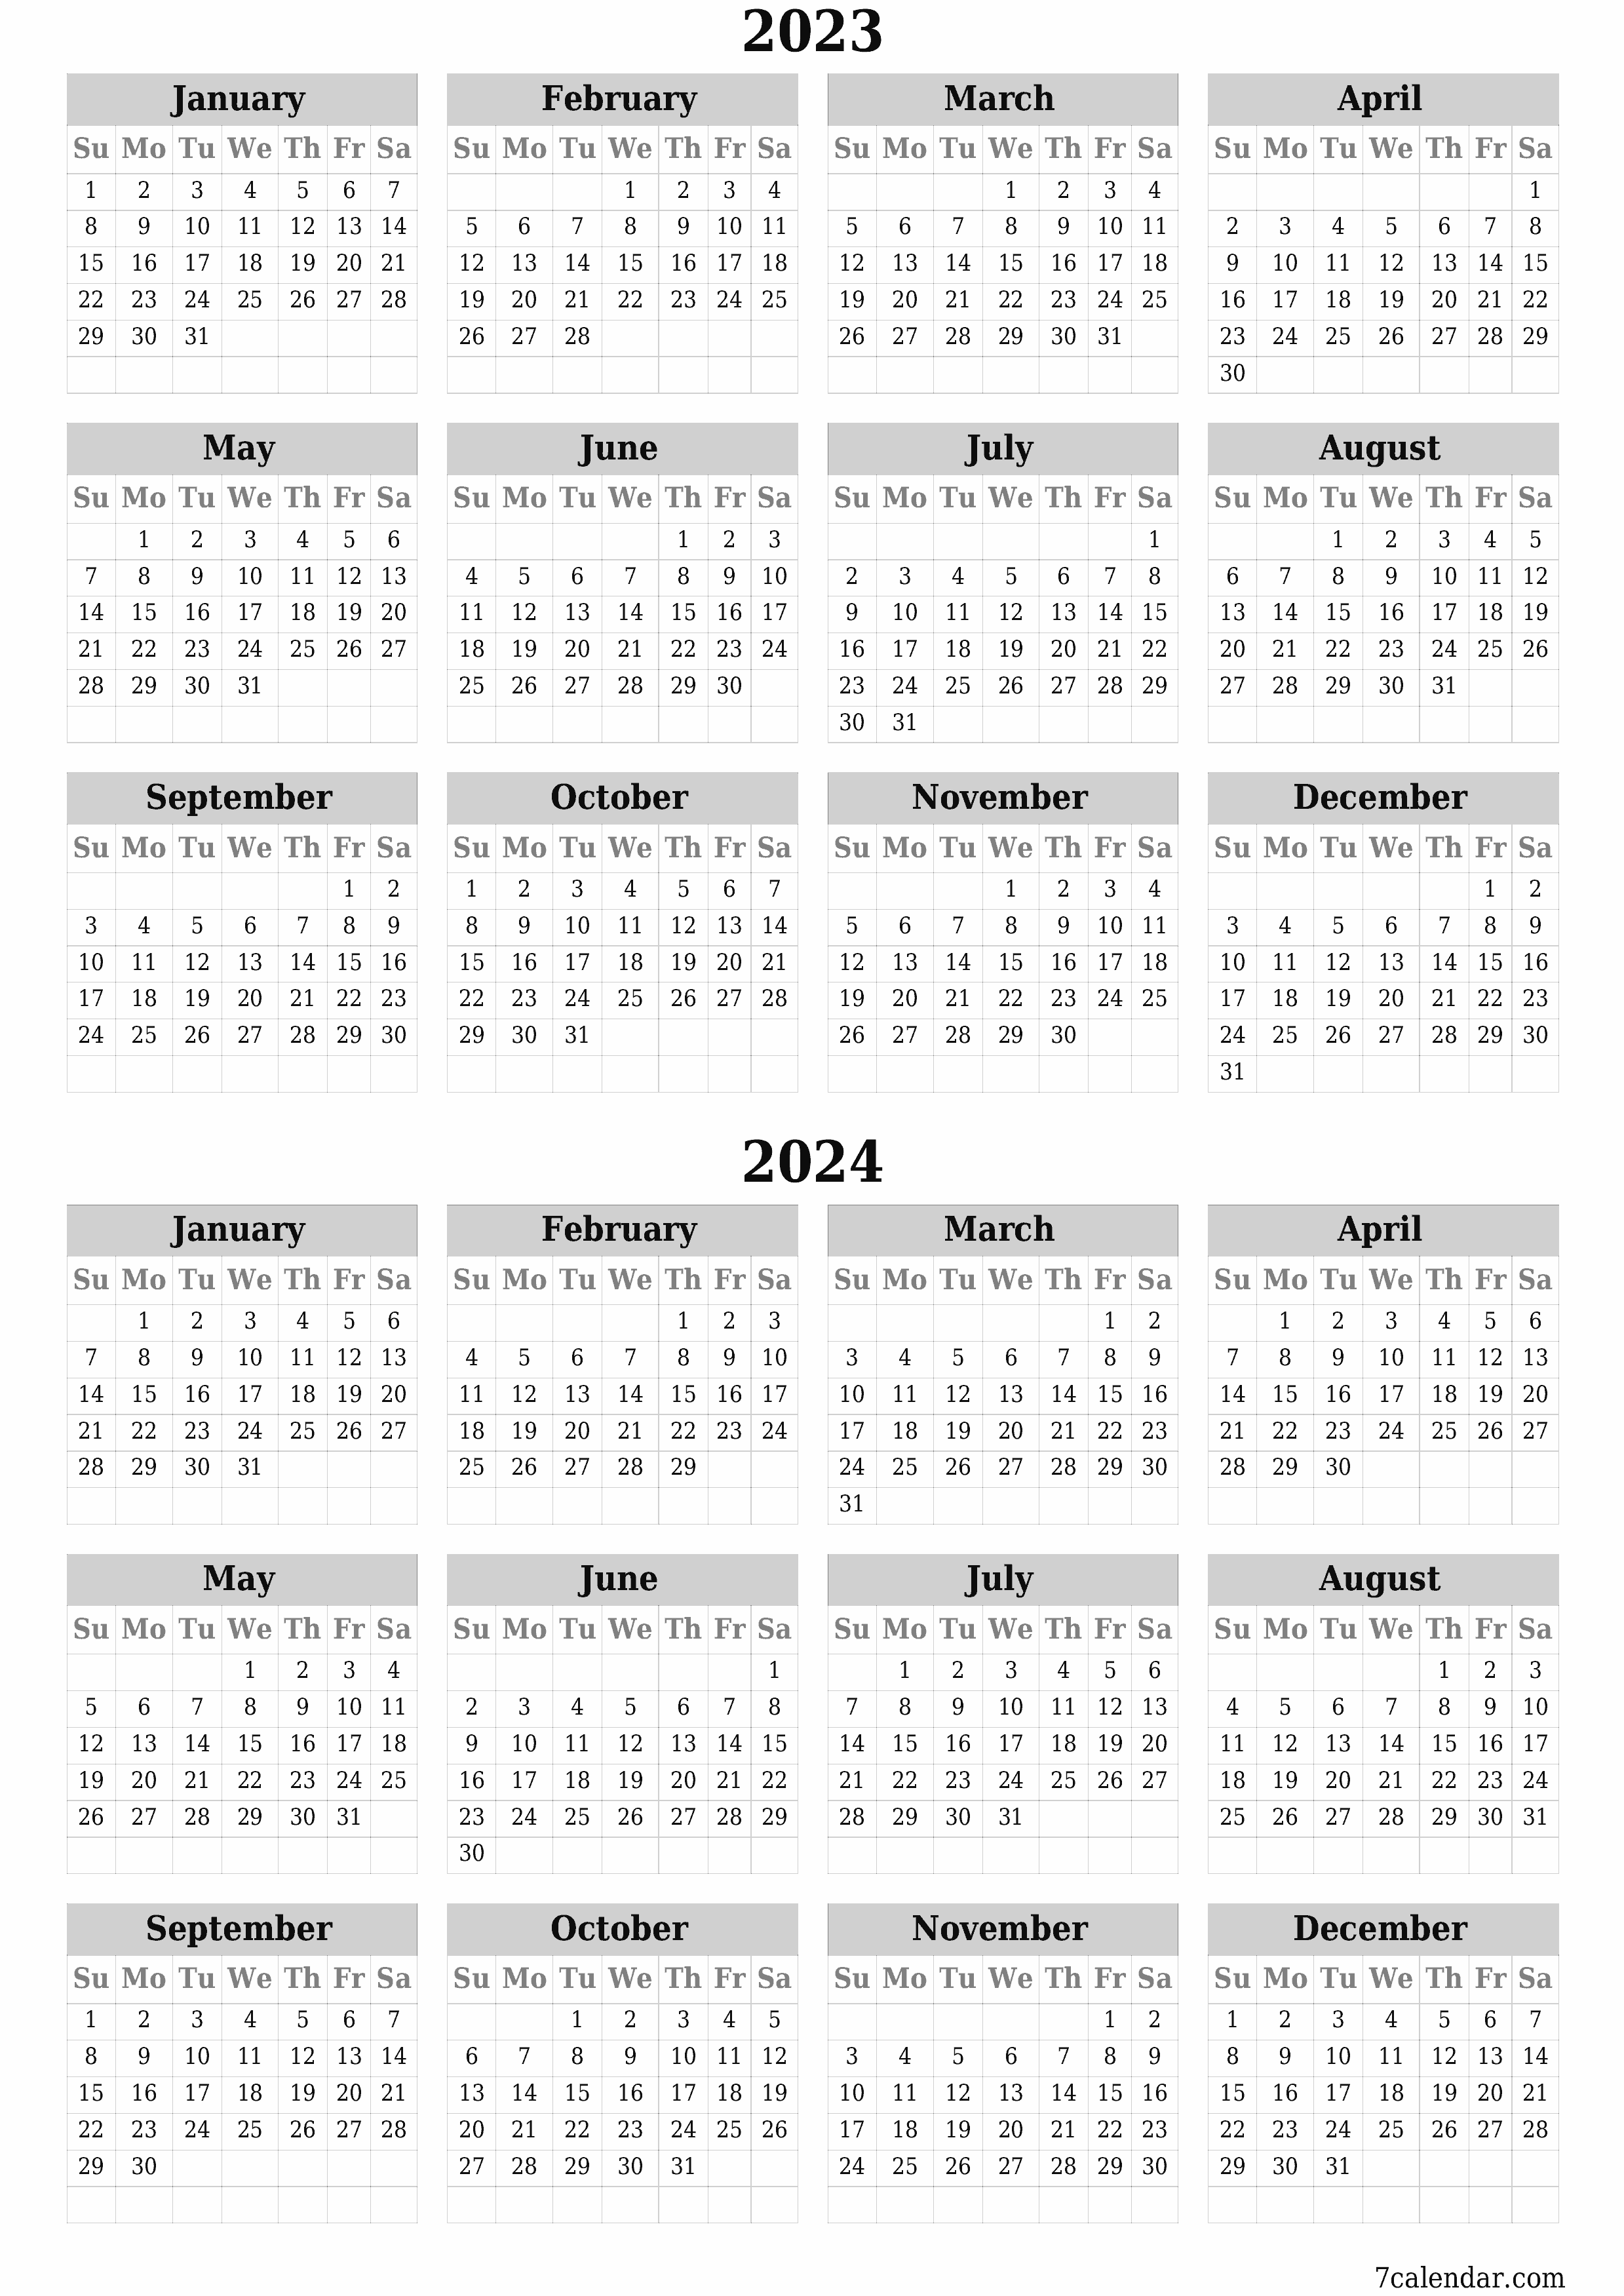 Blank yearly printable calendar and planner for the year 2023, 2024 with notes, save and print to PDF PNG English - 7calendar.com